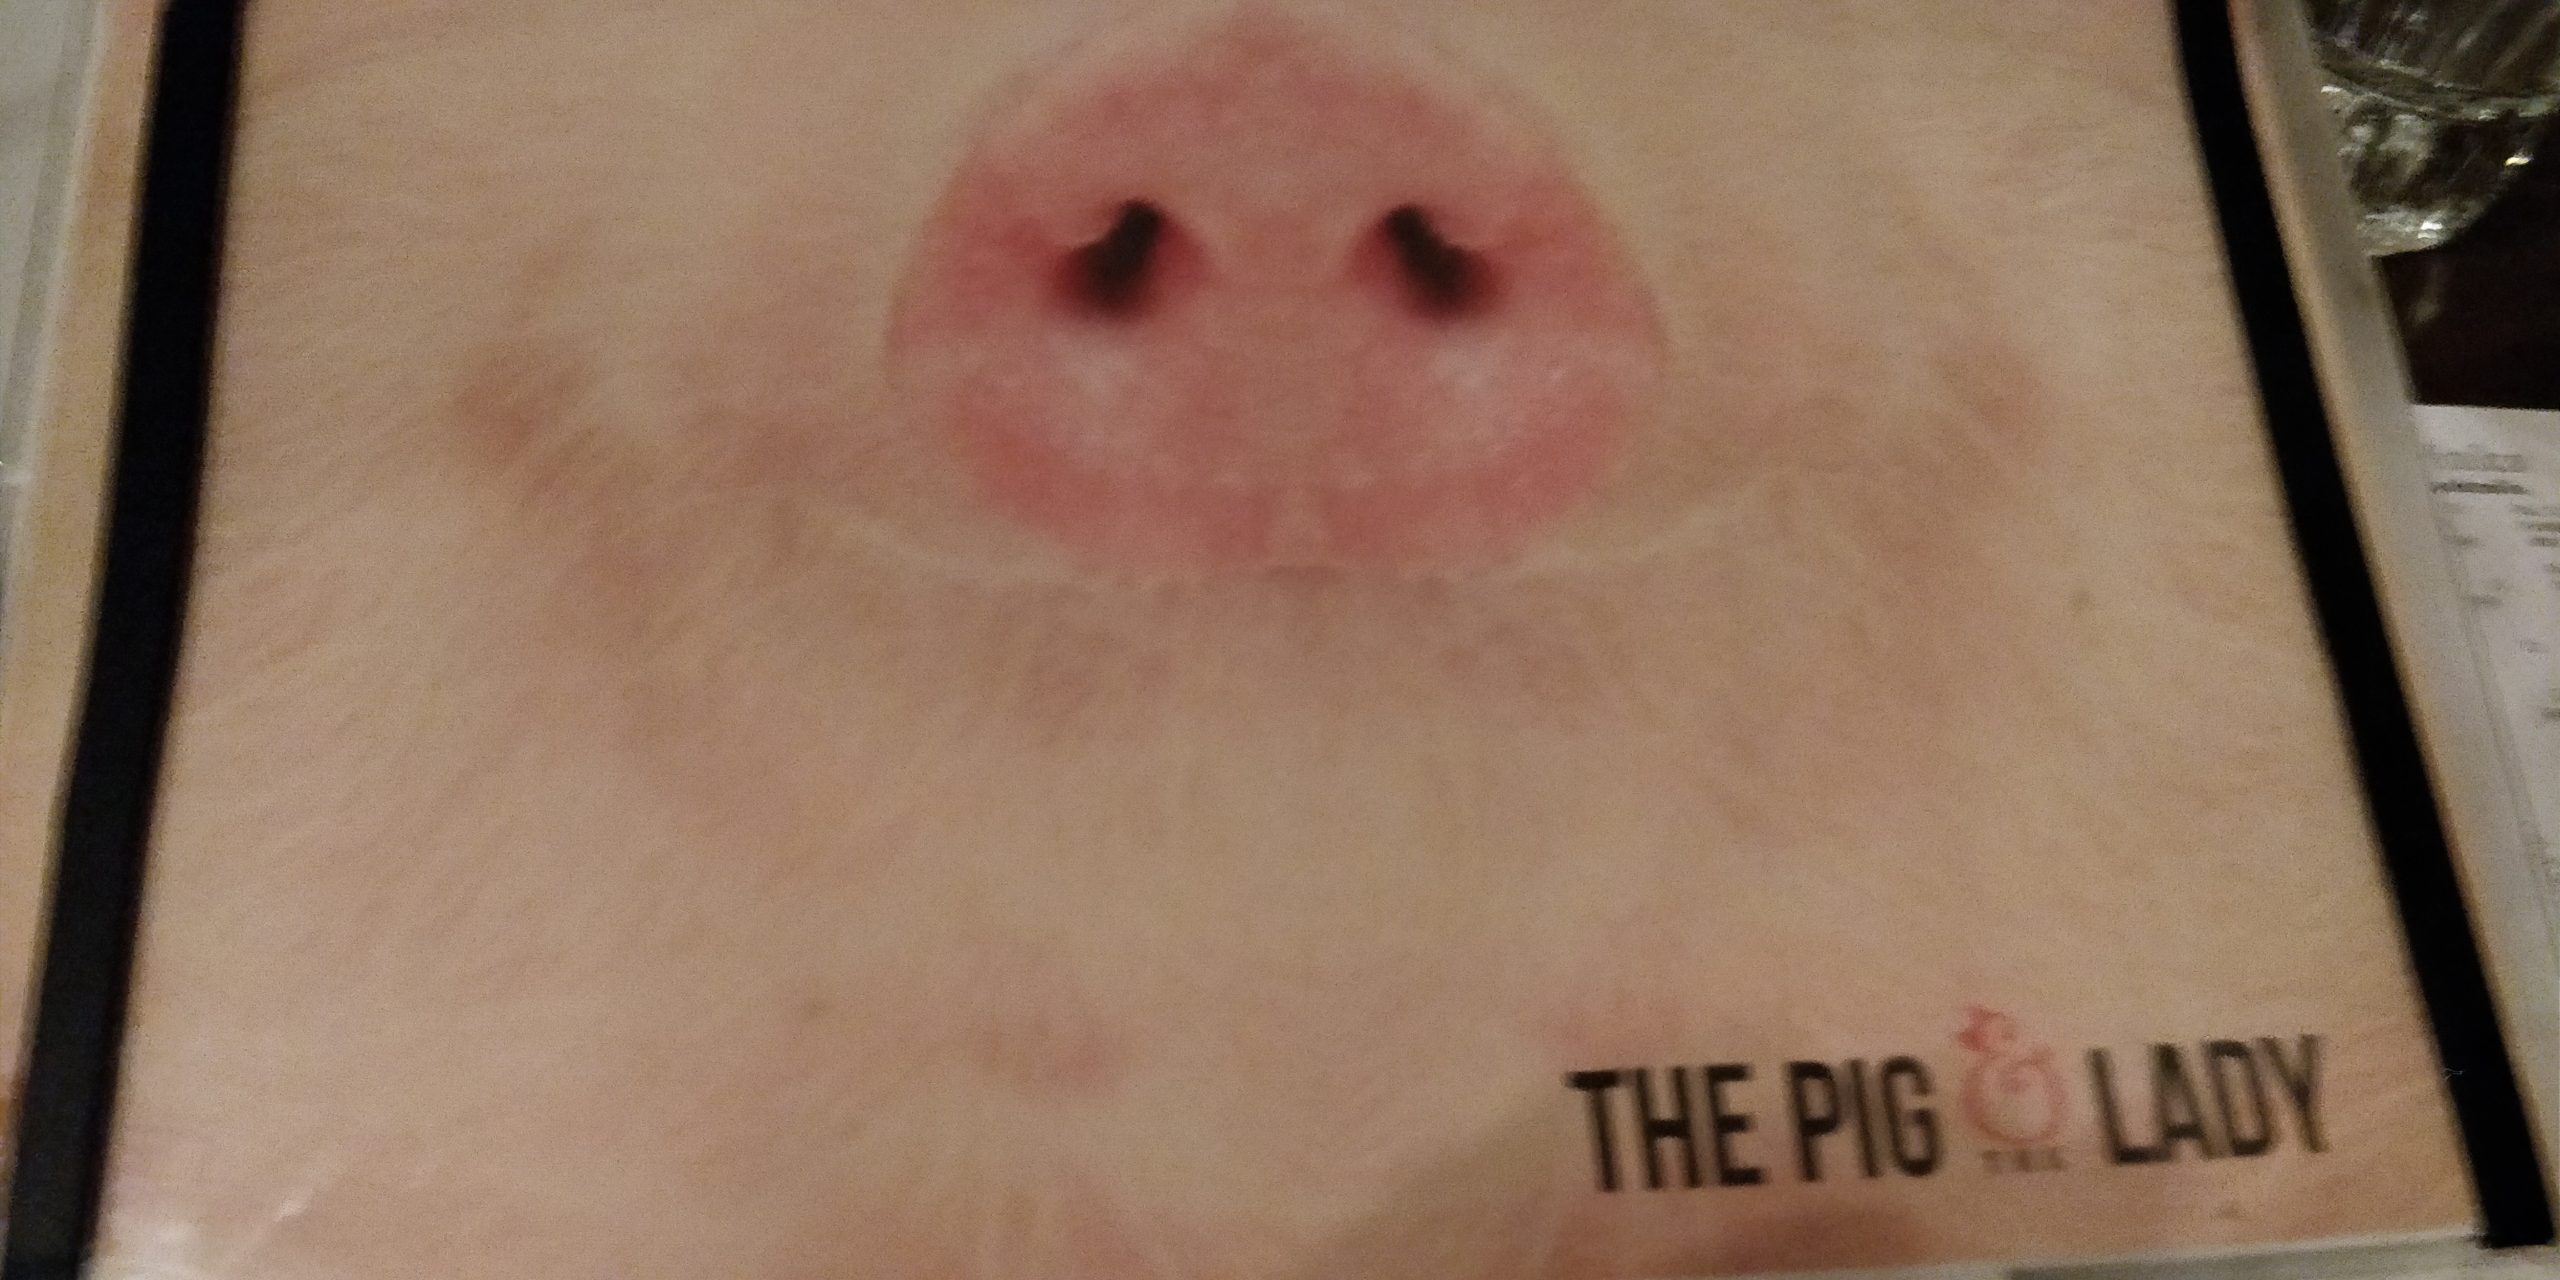 PICTURE OF THE MENU COVER SHOWING A PIG'S SNOUT